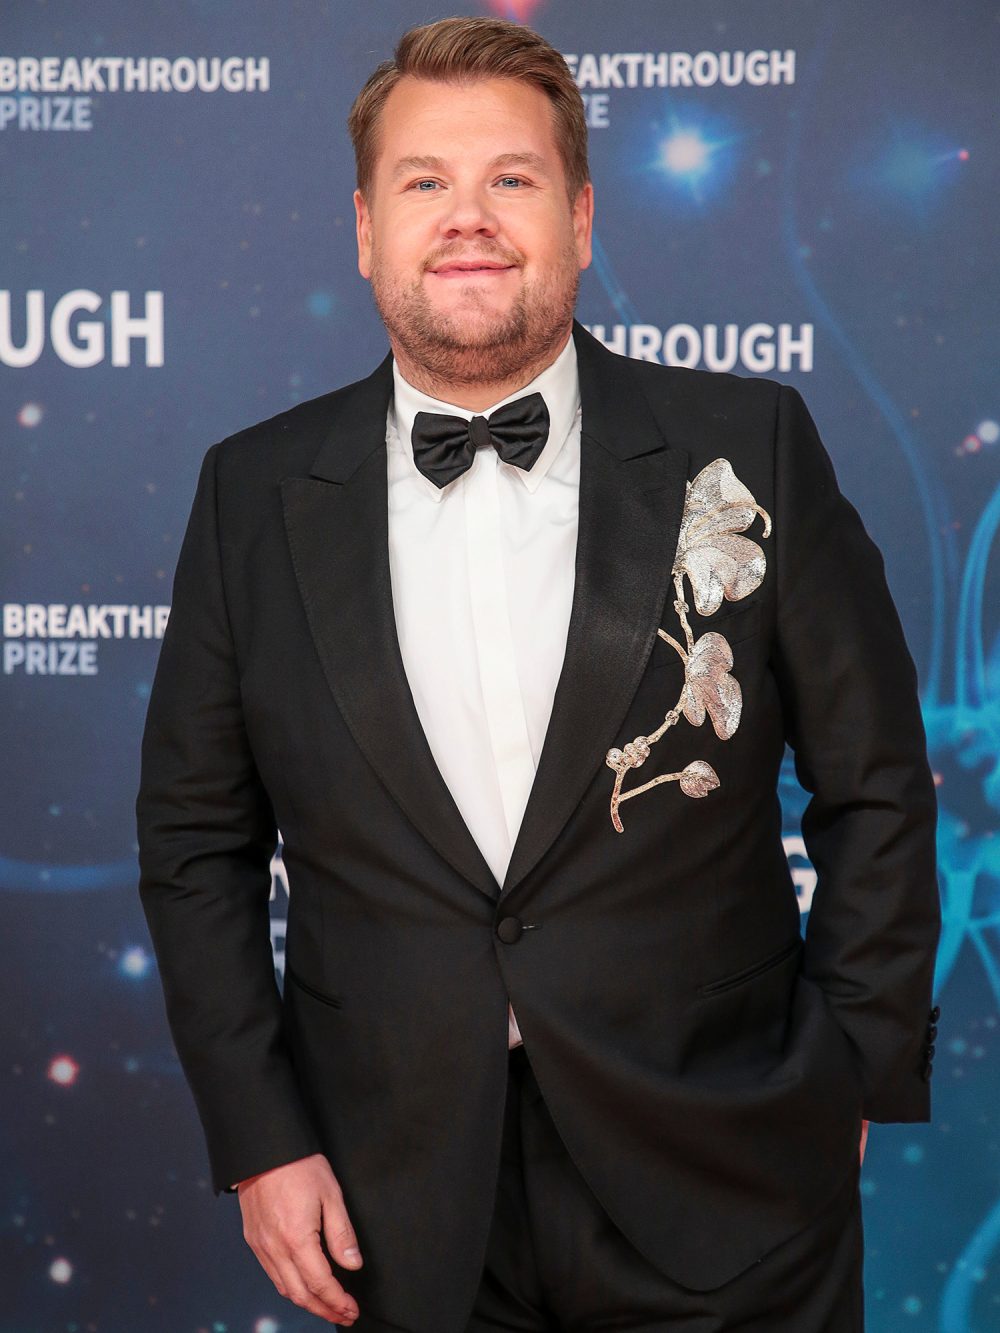 James Corden Says He's 'Fed Up With Being Unhealthy,' Ready For Dramatic Weight Transformation